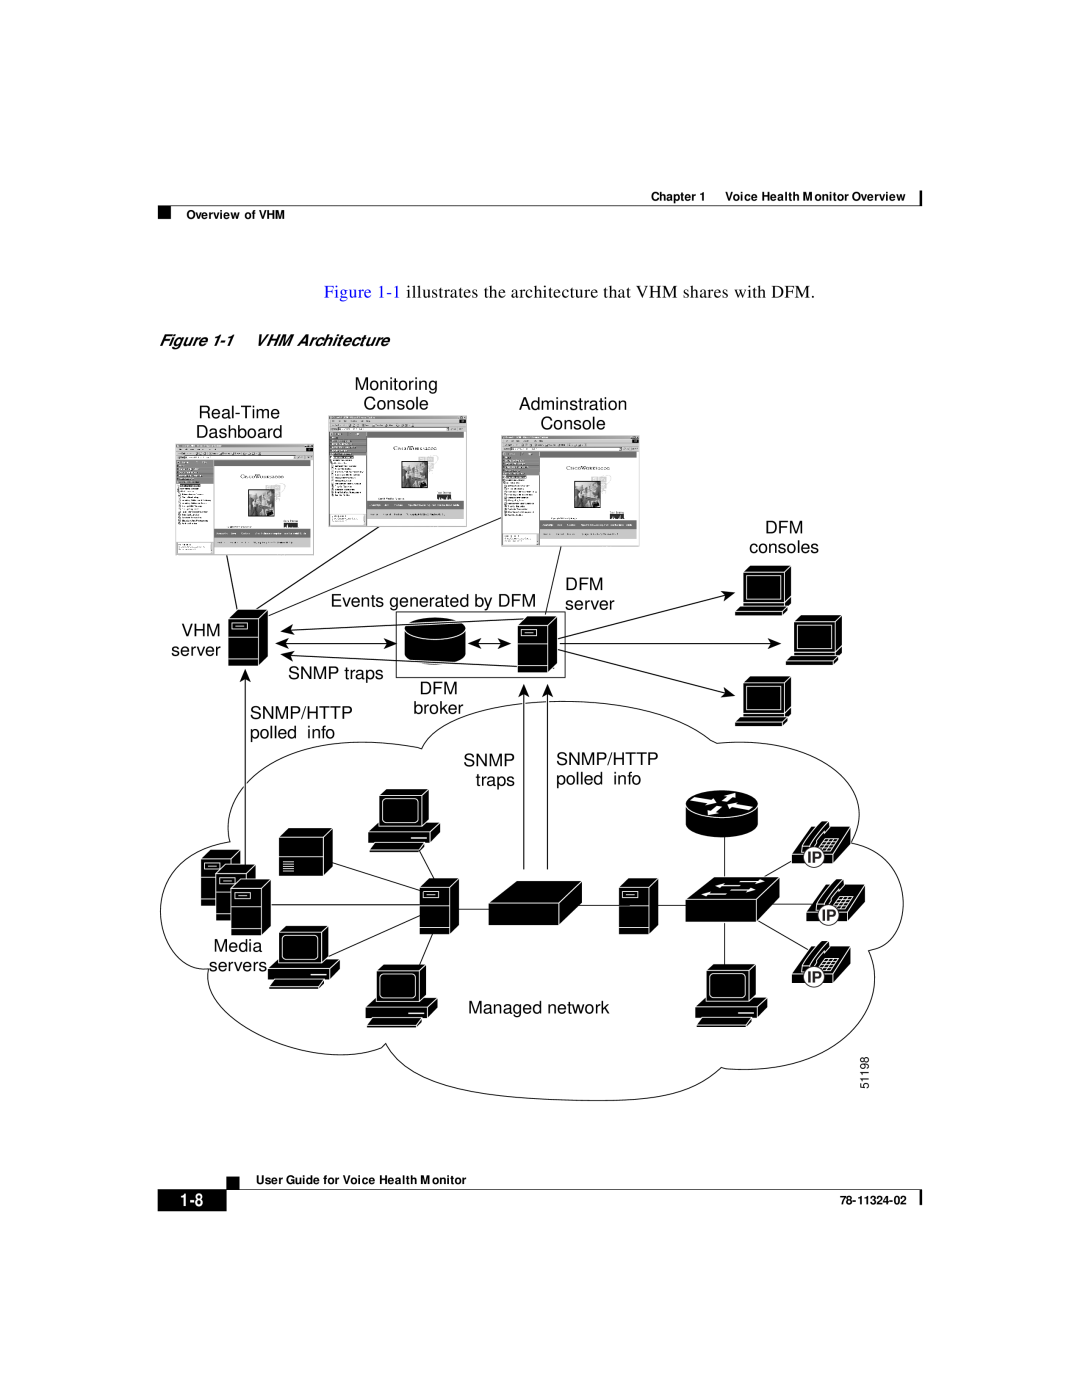 Cisco Systems 78-11324-02 manual 1 illustrates the architecture that VHM shares with DFM, 1 VHM Architecture 